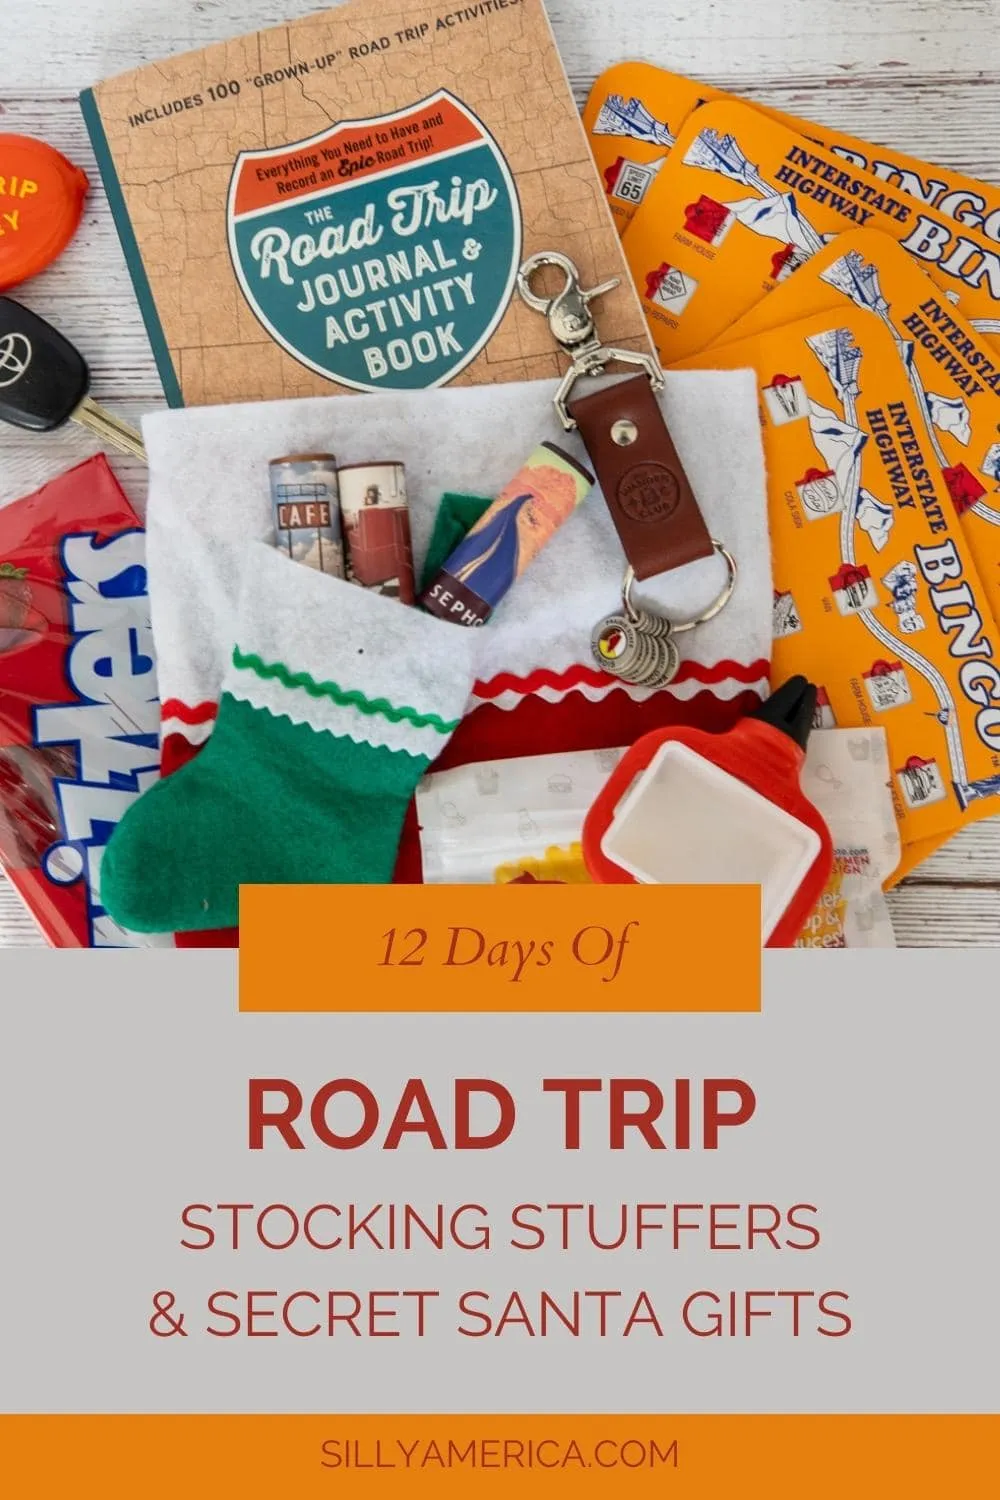 Every year Santa Claus takes the ultimate road trip, traveling all across the globe to cities big and small, spreading cheer in his magical sleigh. If you want to capture some of that magic for yourself by presenting the perfect small gift to a road tripper in your life, this list of twelve perfect Road Trip Stocking Stuffers and Secret Santa gifts is your guide to small things that will give a big smile to the travel lovers who receive them. #RoadTrip #RoadTripGifts #GiftGuide #TravelGifts